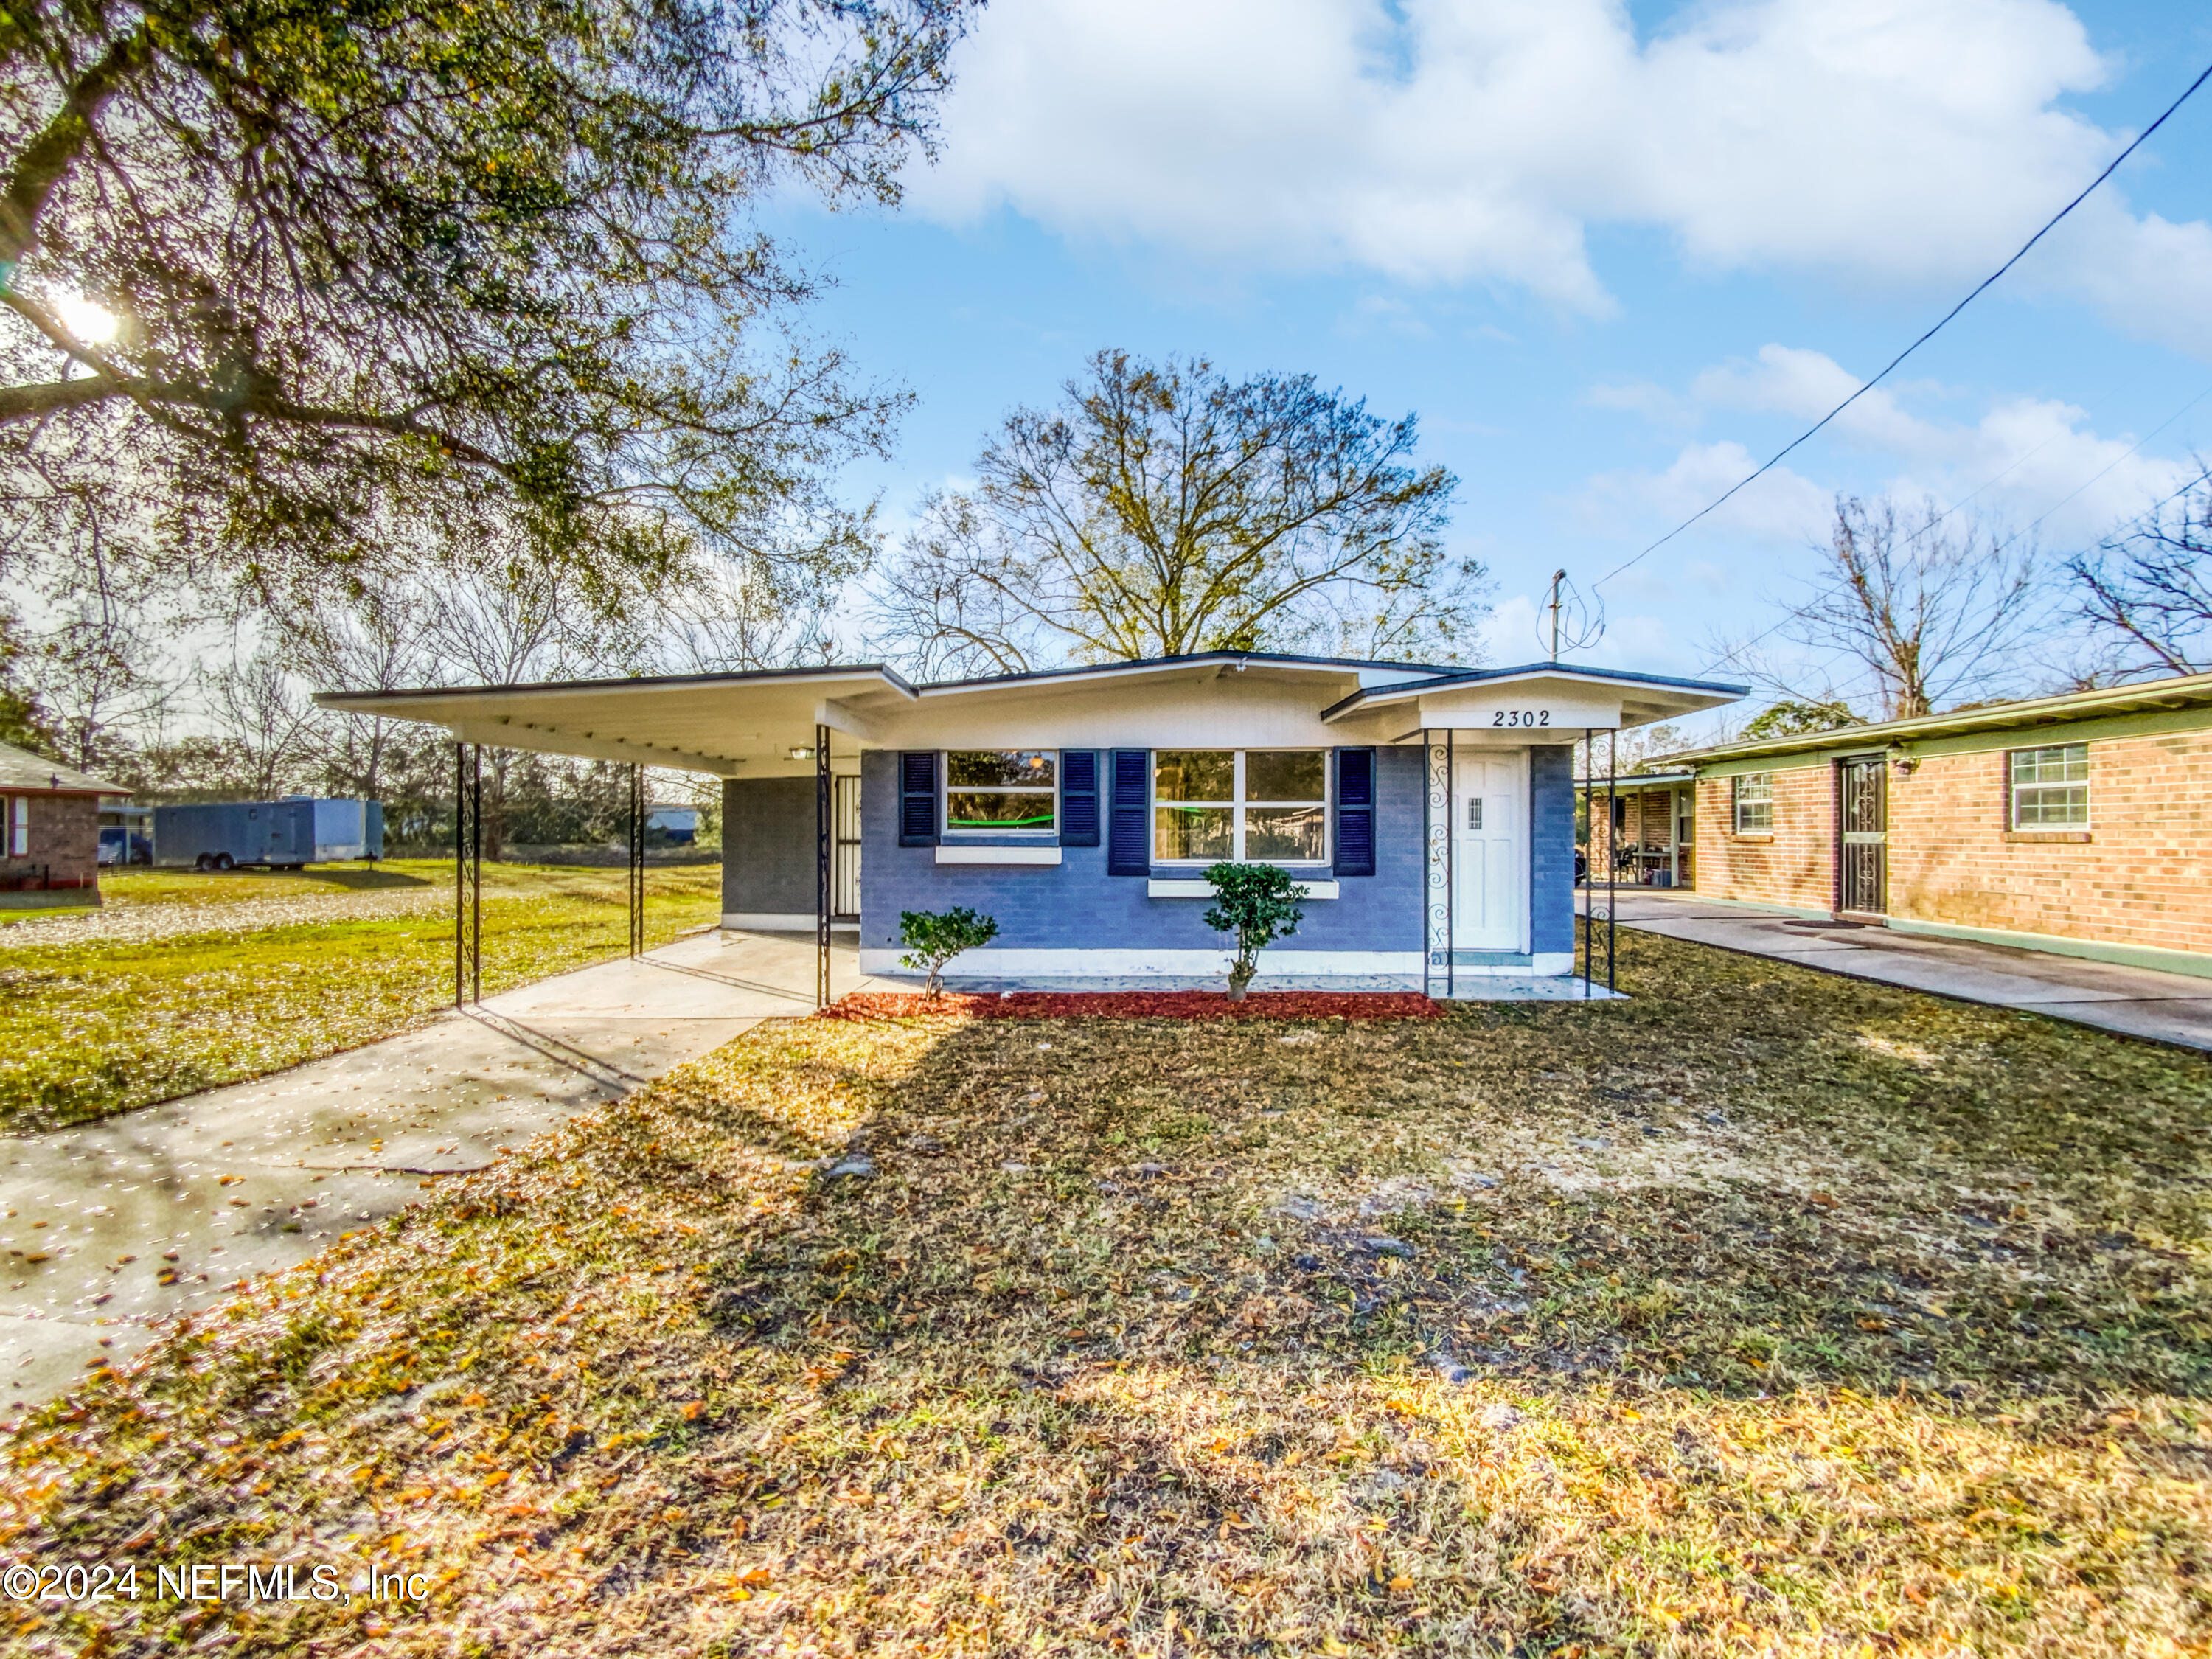 Jacksonville, FL home for sale located at 2302 W 10th Street, Jacksonville, FL 32209